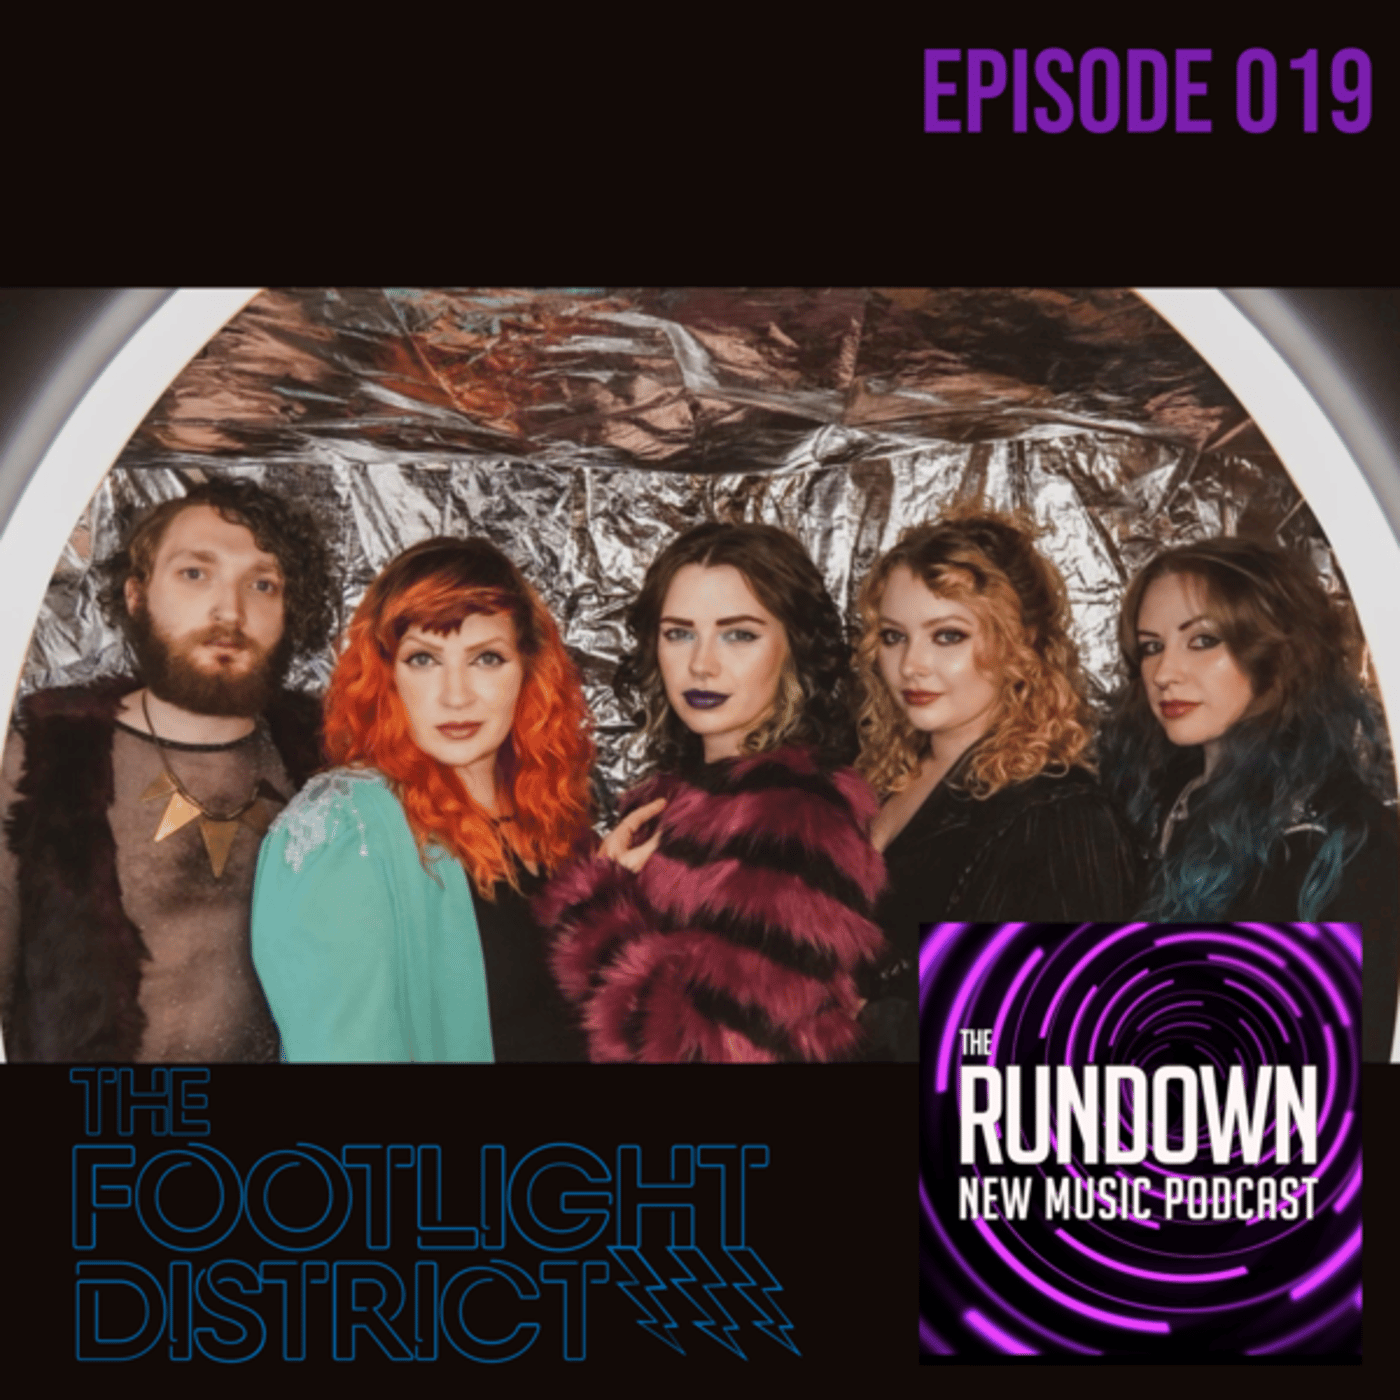 Episode 019 | Interview with The Footlight District